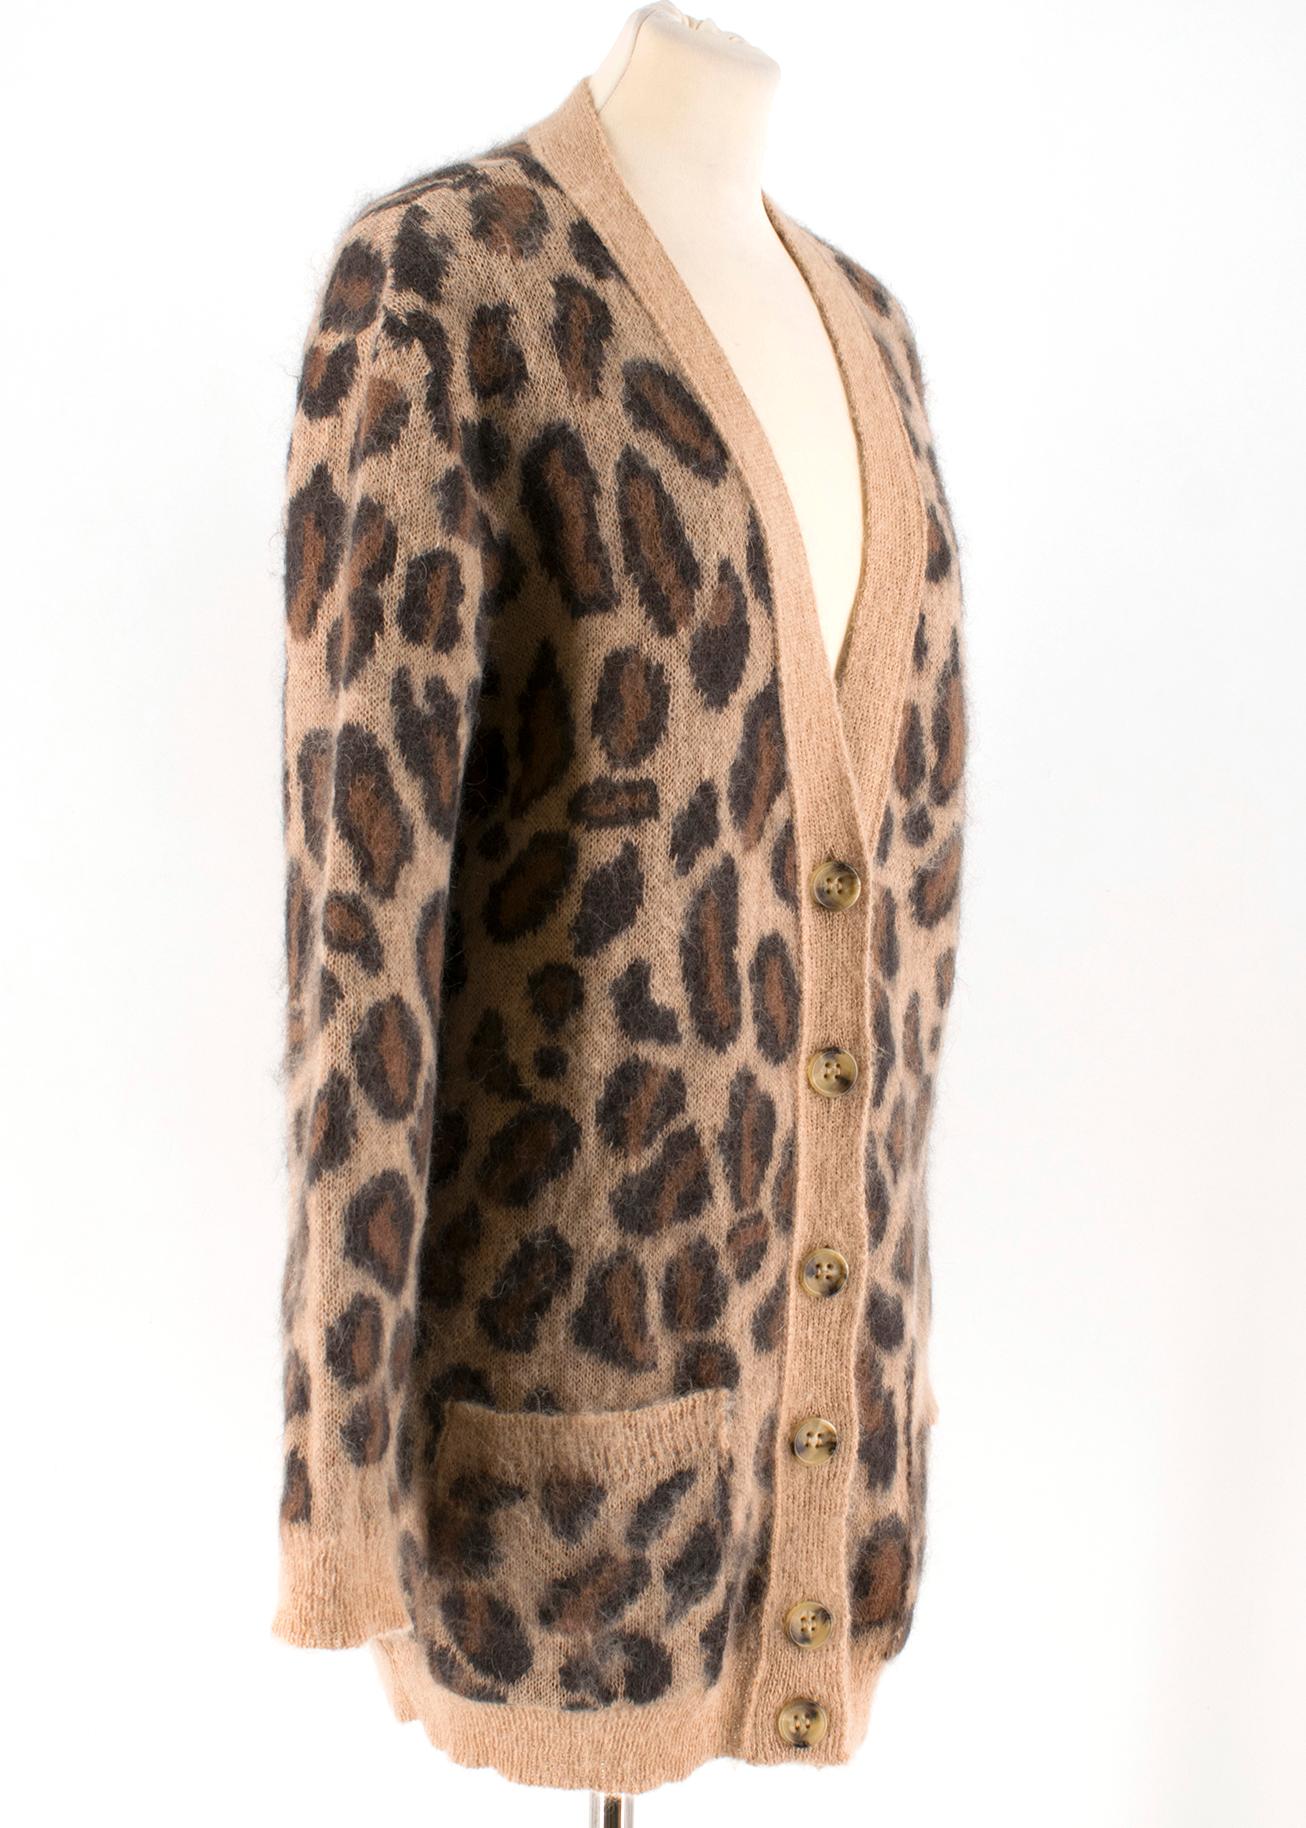 Red Valentino Leopard Print Knit Cardigan 

- Brown leopard print cardigan 
- Mohair Blend 
- V-neck, long sleeved 
- Buttoned center front 
- Front jet pockets 
- Ribbed edges 
- 67% Mohair, 28% Polyamide, 5% Wool 

Please note, these items are